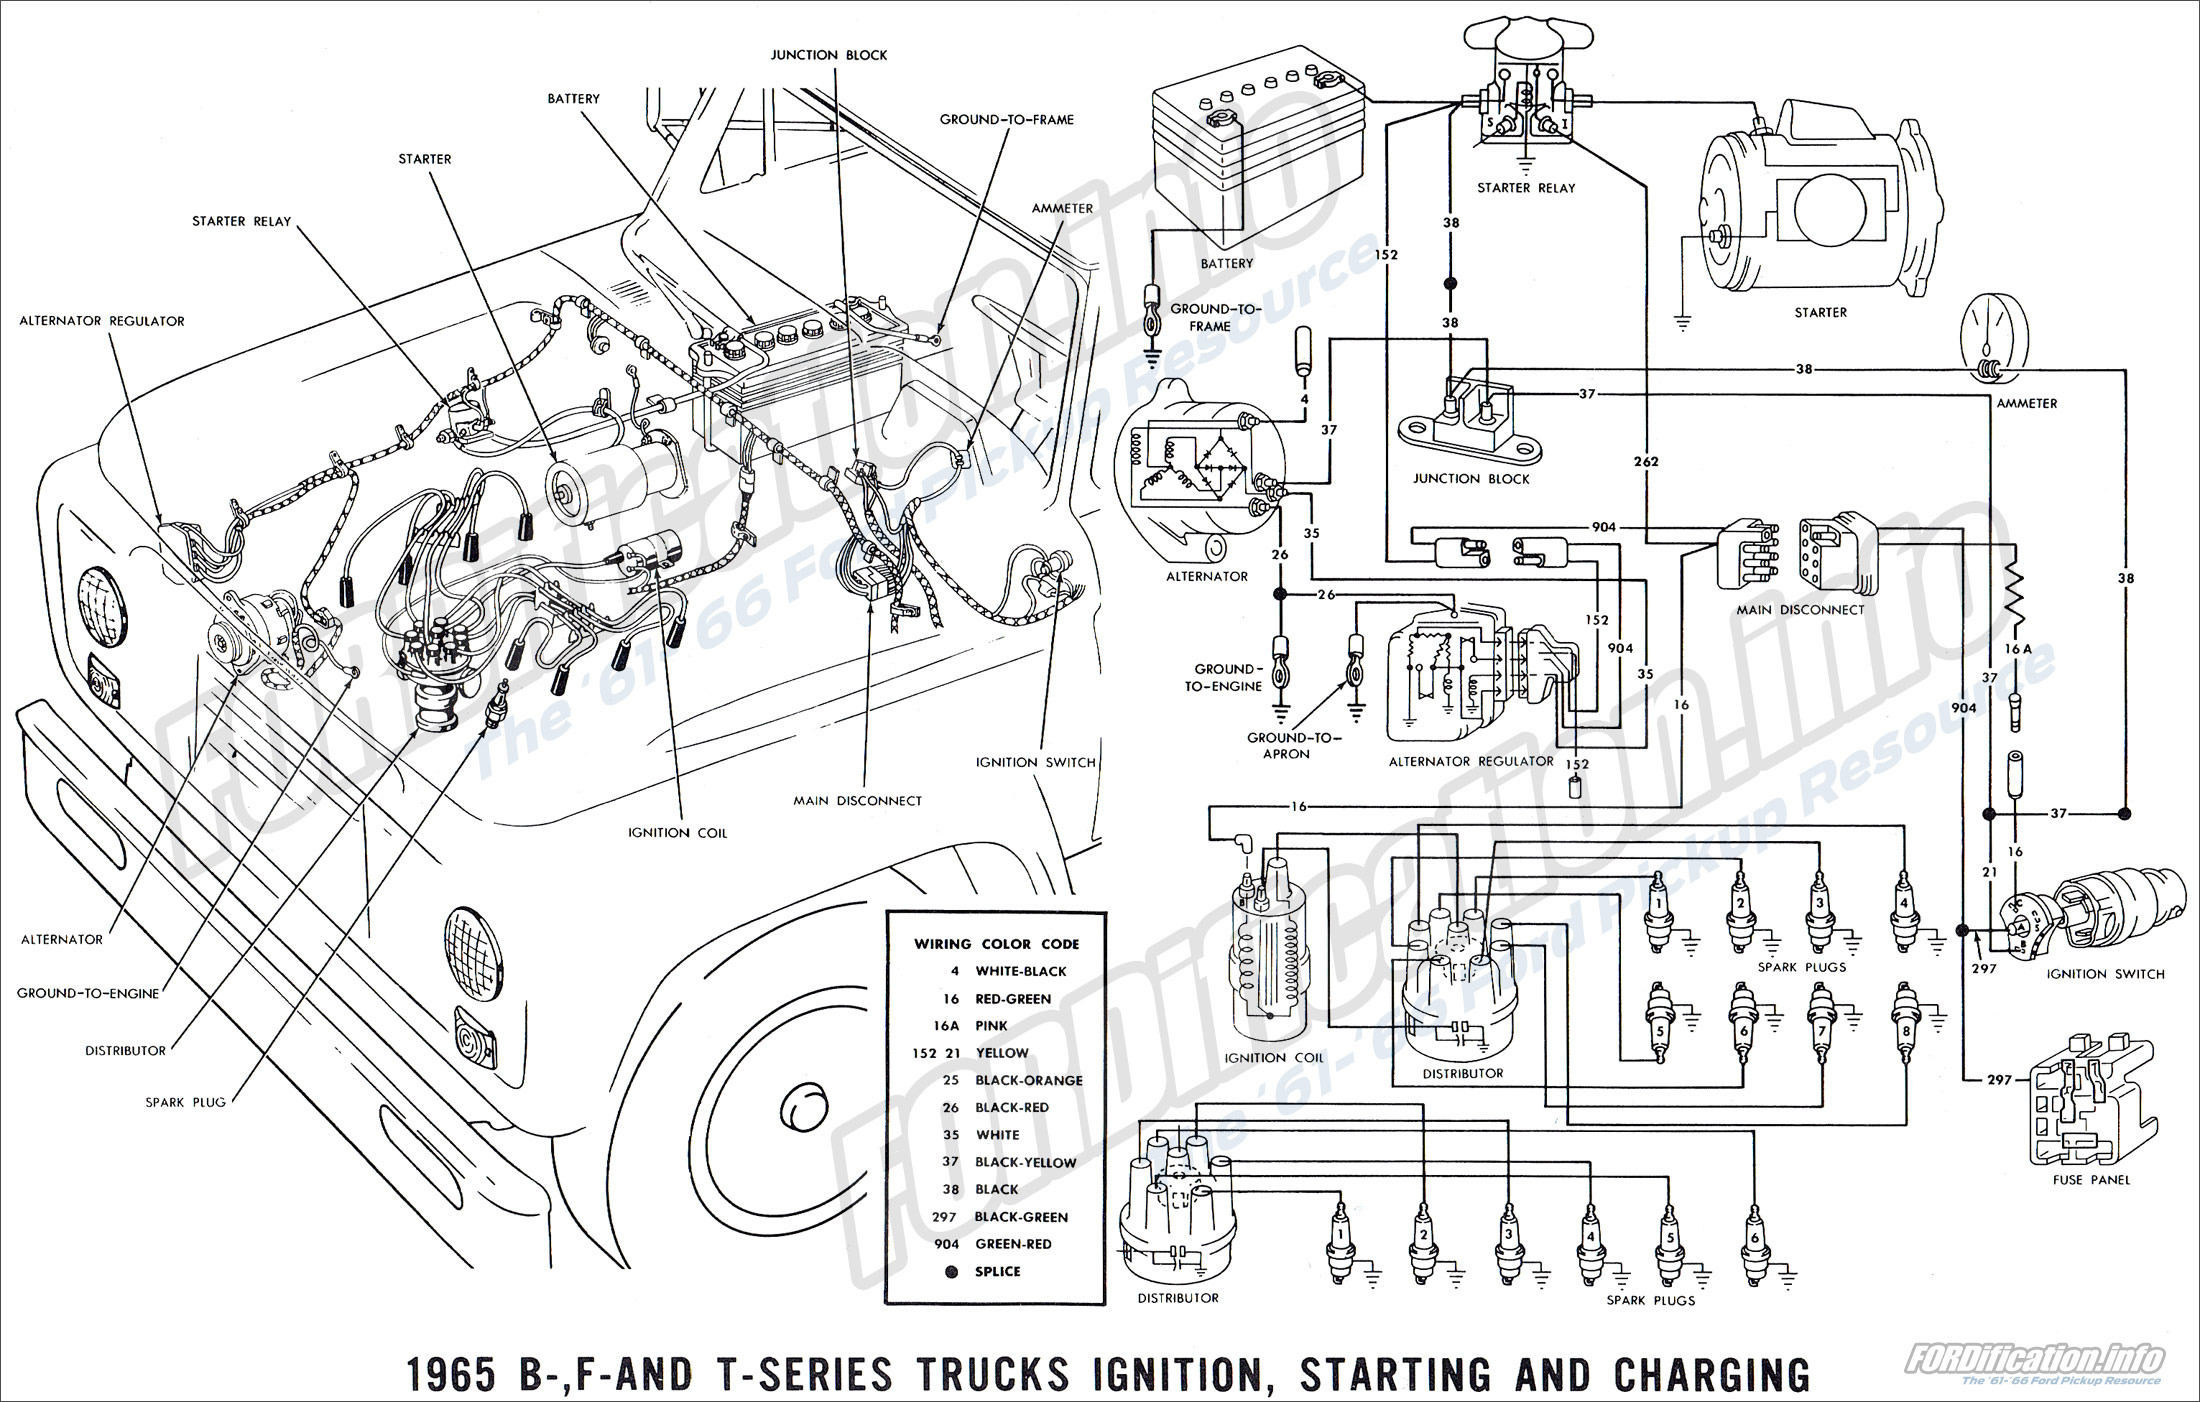 1965 Ford Truck Wiring Diagrams - FORDification.info - The ... ford truck ignition wiring 